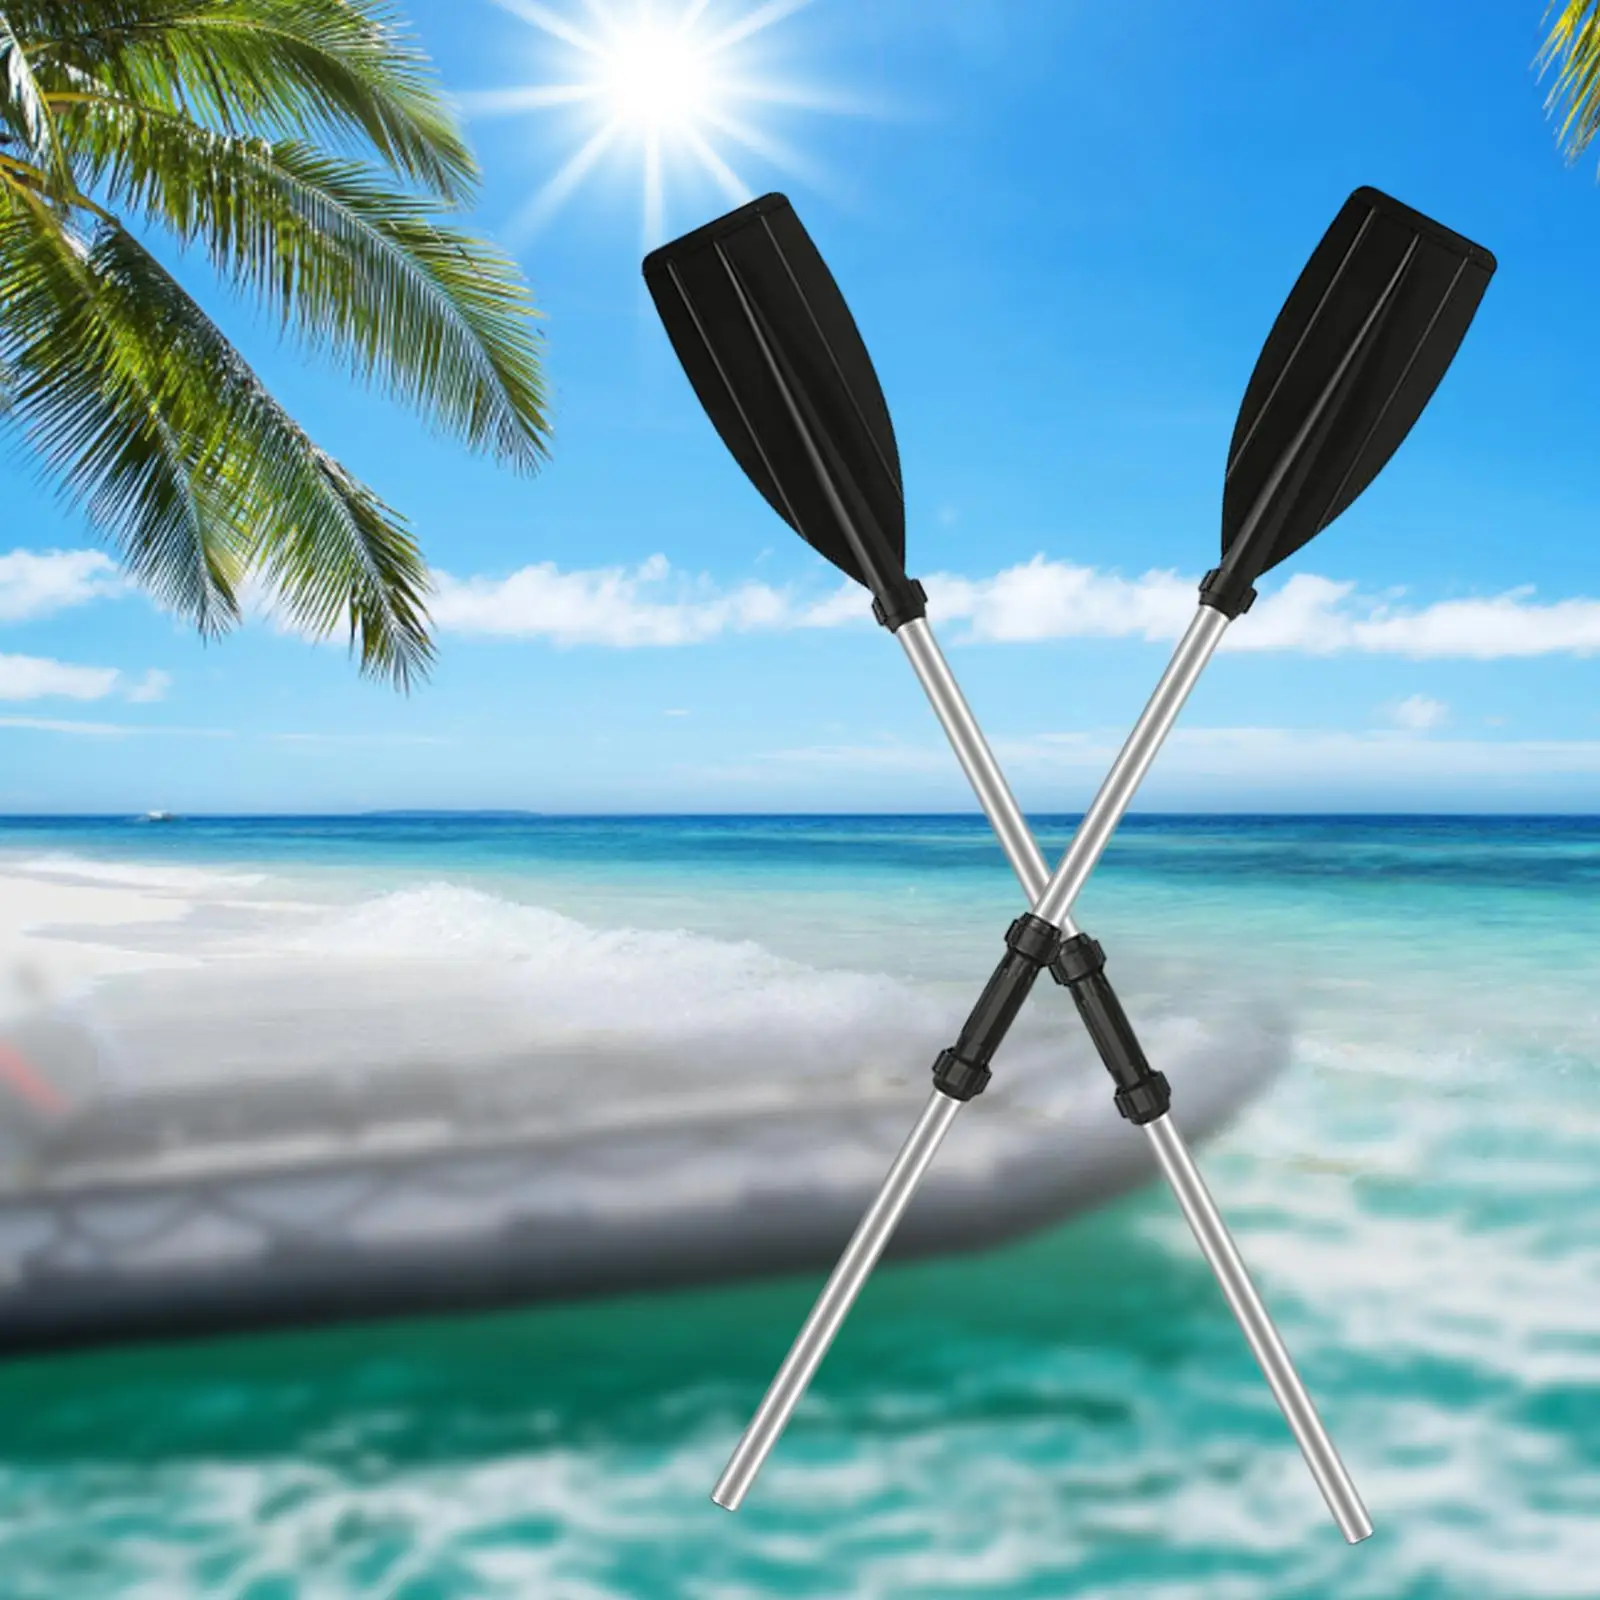 Multipurpose Kayak Boat Rafting Paddle Aluminium Alloy Detachable Accessories Stand up Paddle Board for Rafting Outdoor Sports